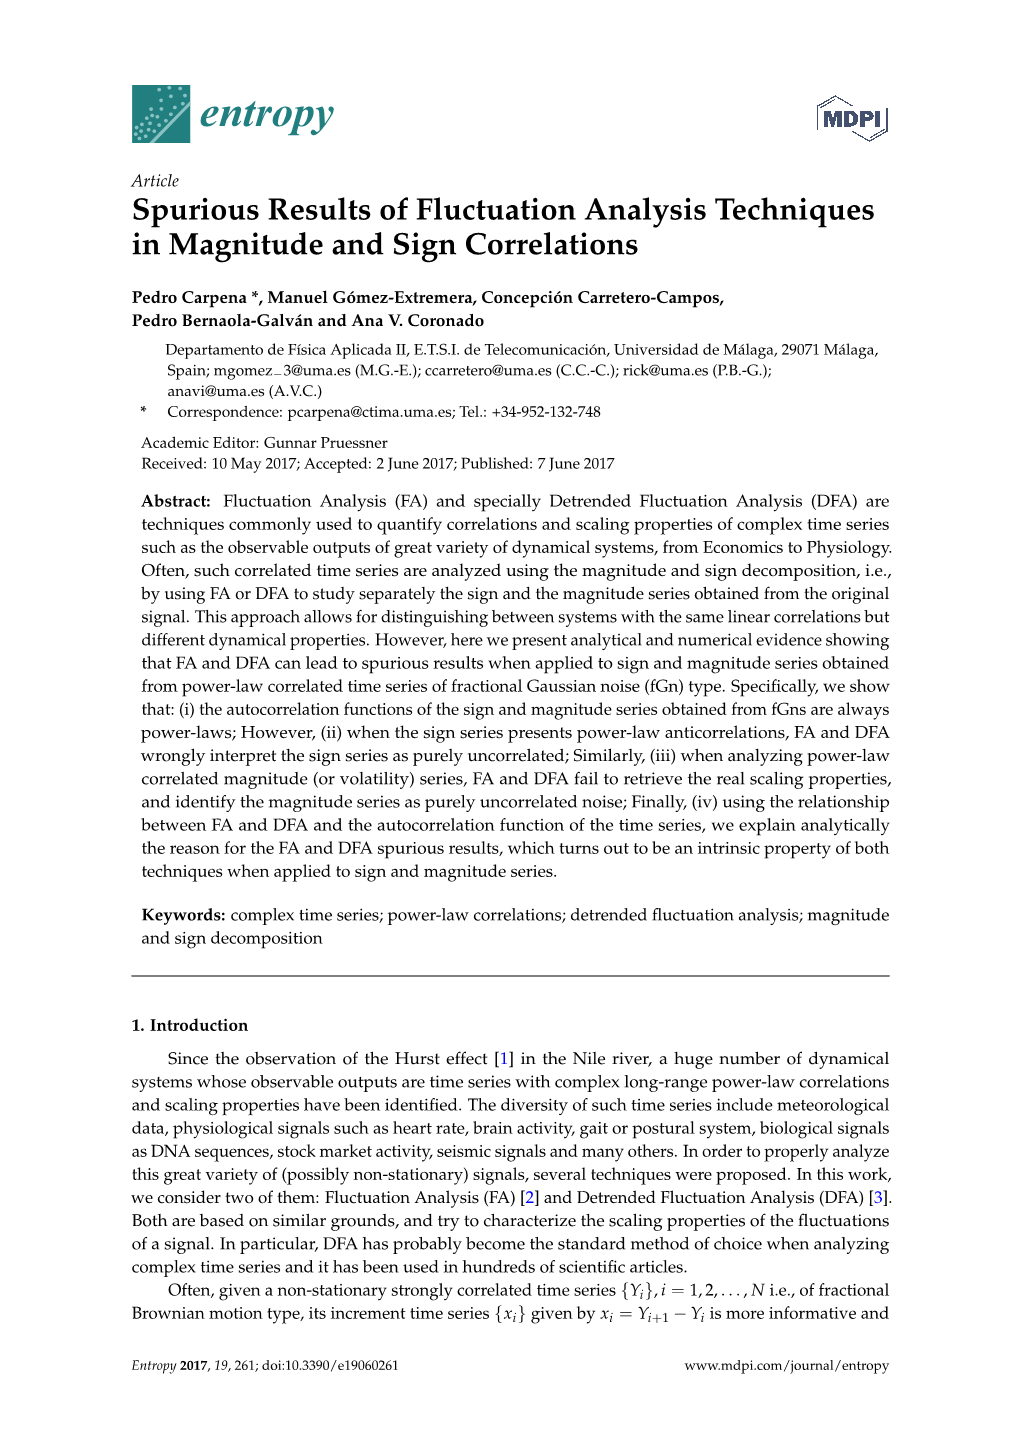 Spurious Results of Fluctuation Analysis Techniques in Magnitude and Sign Correlations